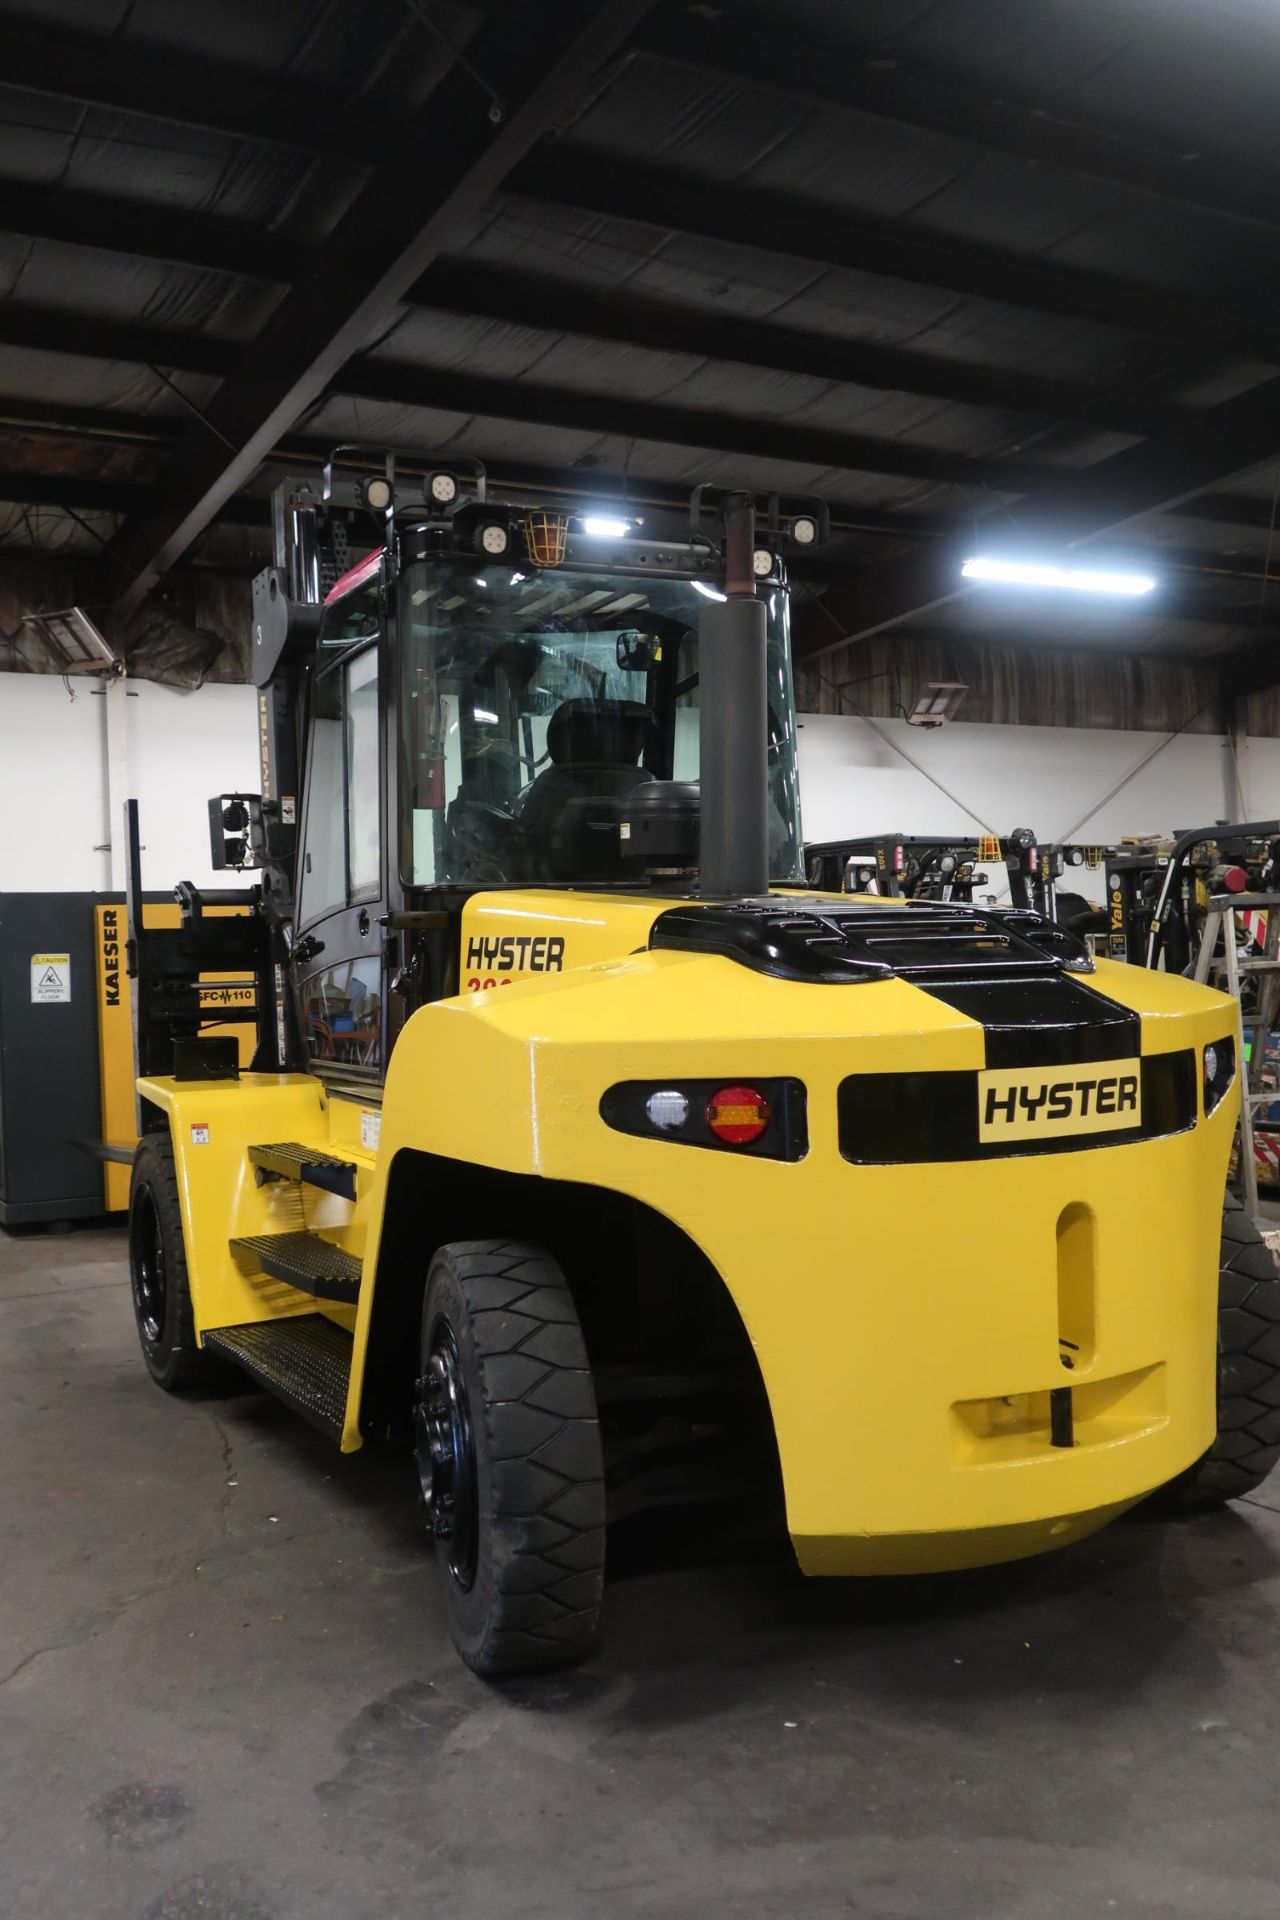 FREE CUSTOMS - 2013 Hyster 28000lbs OUTDOOR Forklift with 8' FORKS Diesel with Fork Positioner - Image 2 of 6